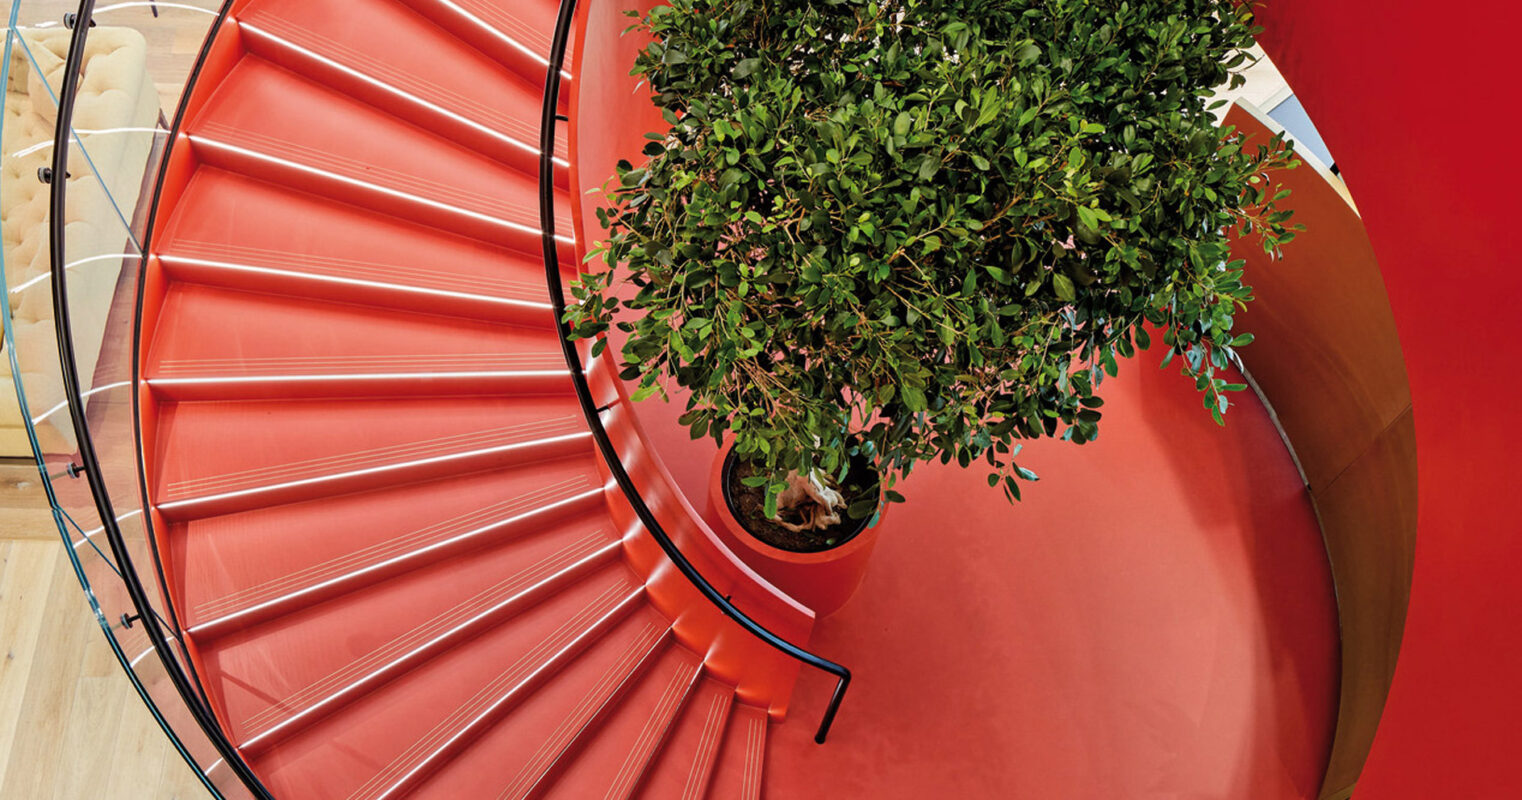 Spiral staircase with striking red walls encircled by metallic balusters. Below, a single figure walks, offering scale, beside a central green potted tree creating a natural contrast to the bold architectural lines.